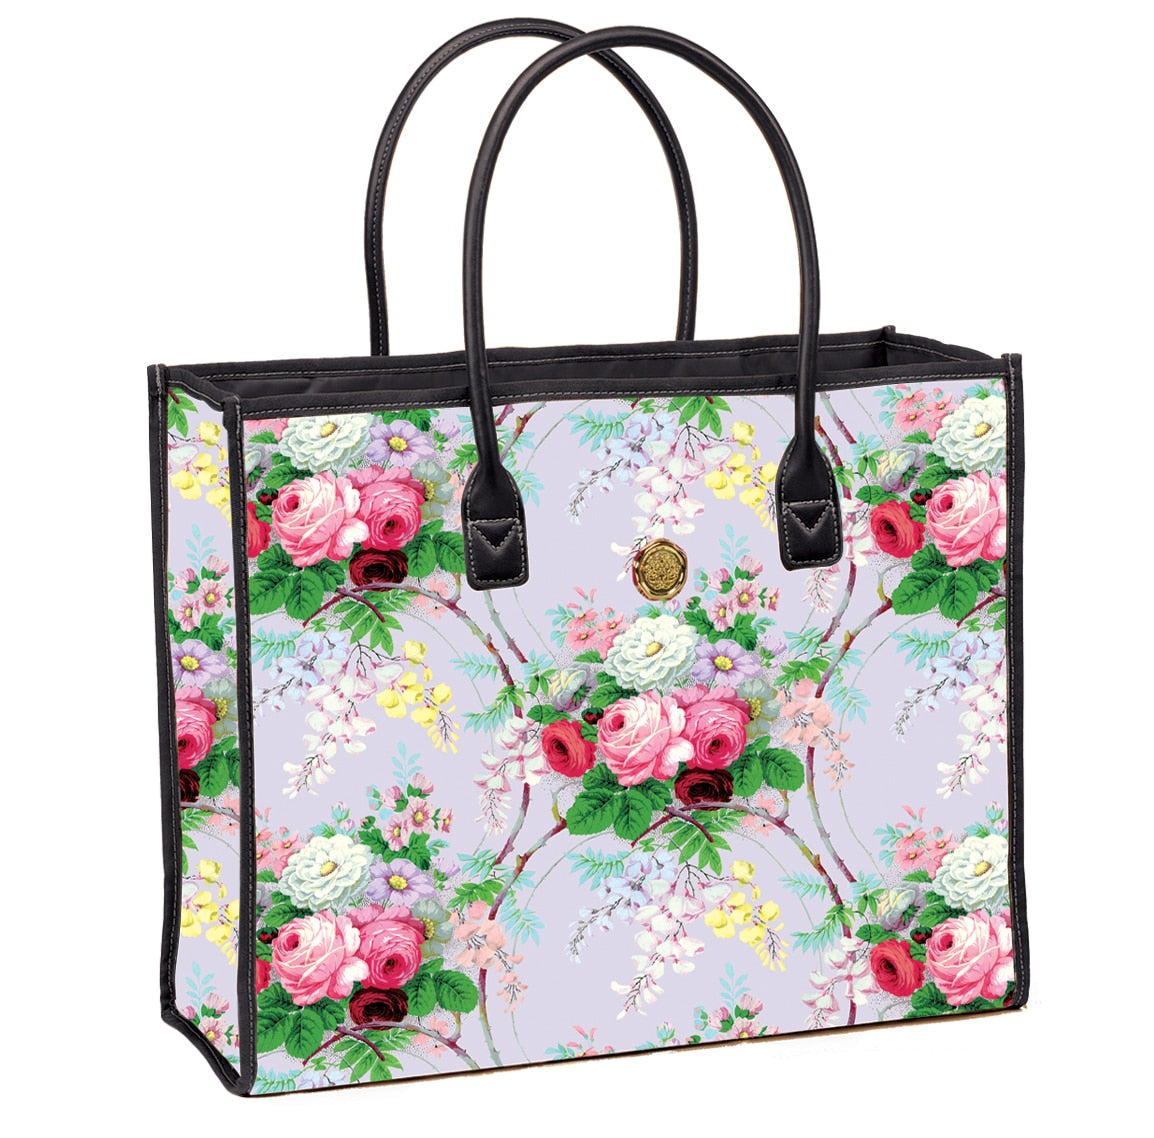 A Lillian Tote Bag with a floral pattern on it.